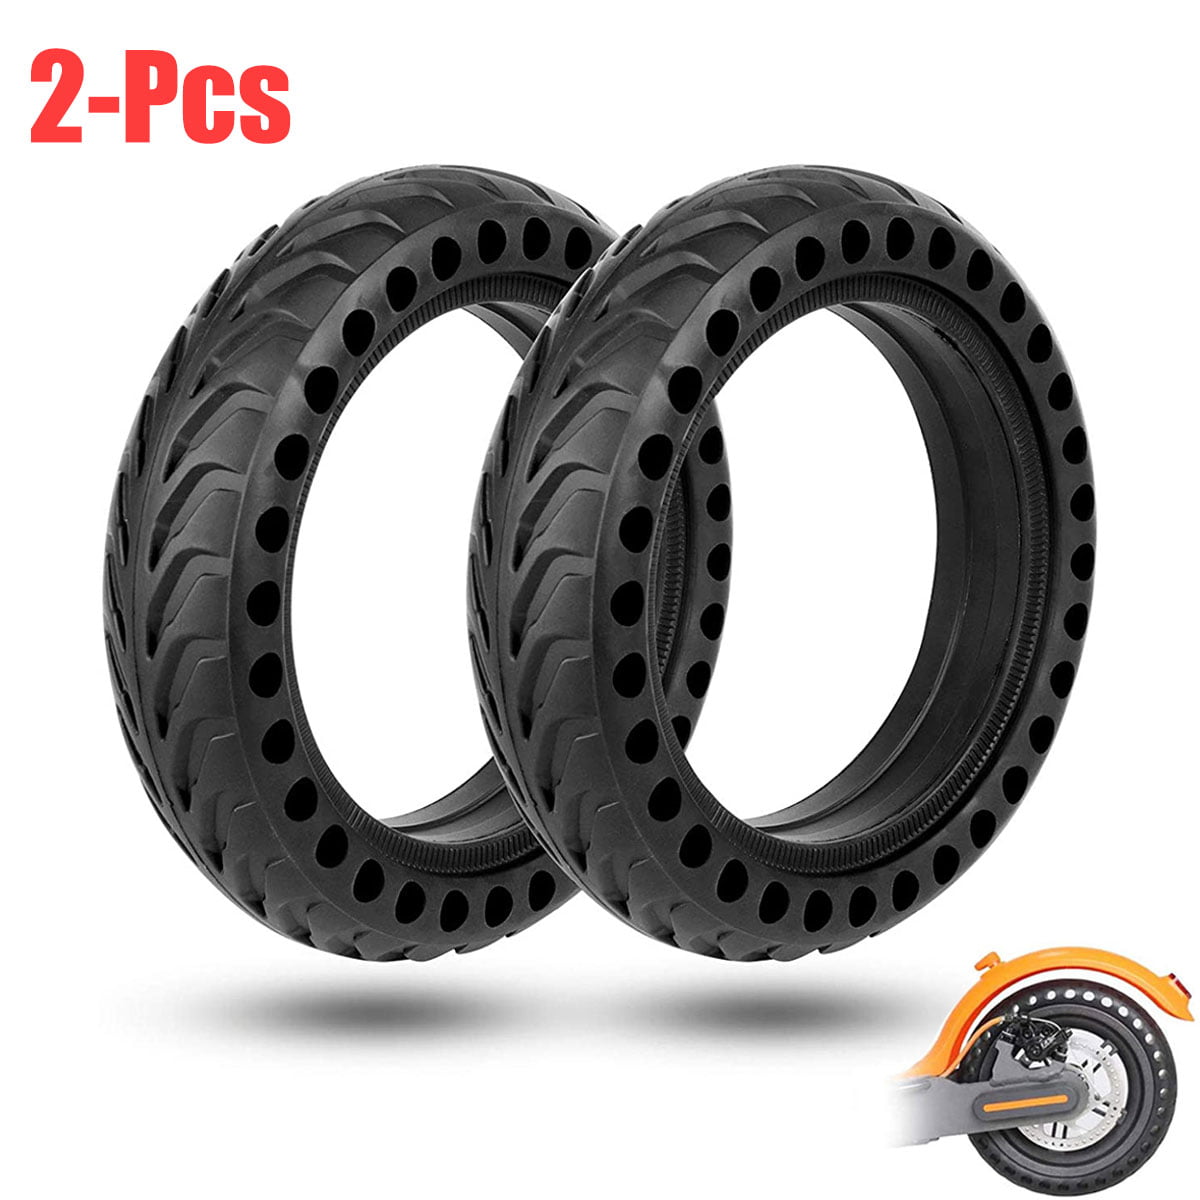 Black 1 Tires CreazyBee Electric Scooter Replacement Wheels Solid Never Flat Tires Compatible with Xiaomi M365,Compatible with GOTRAX GXL V2 or Similar E-Scooter Models 